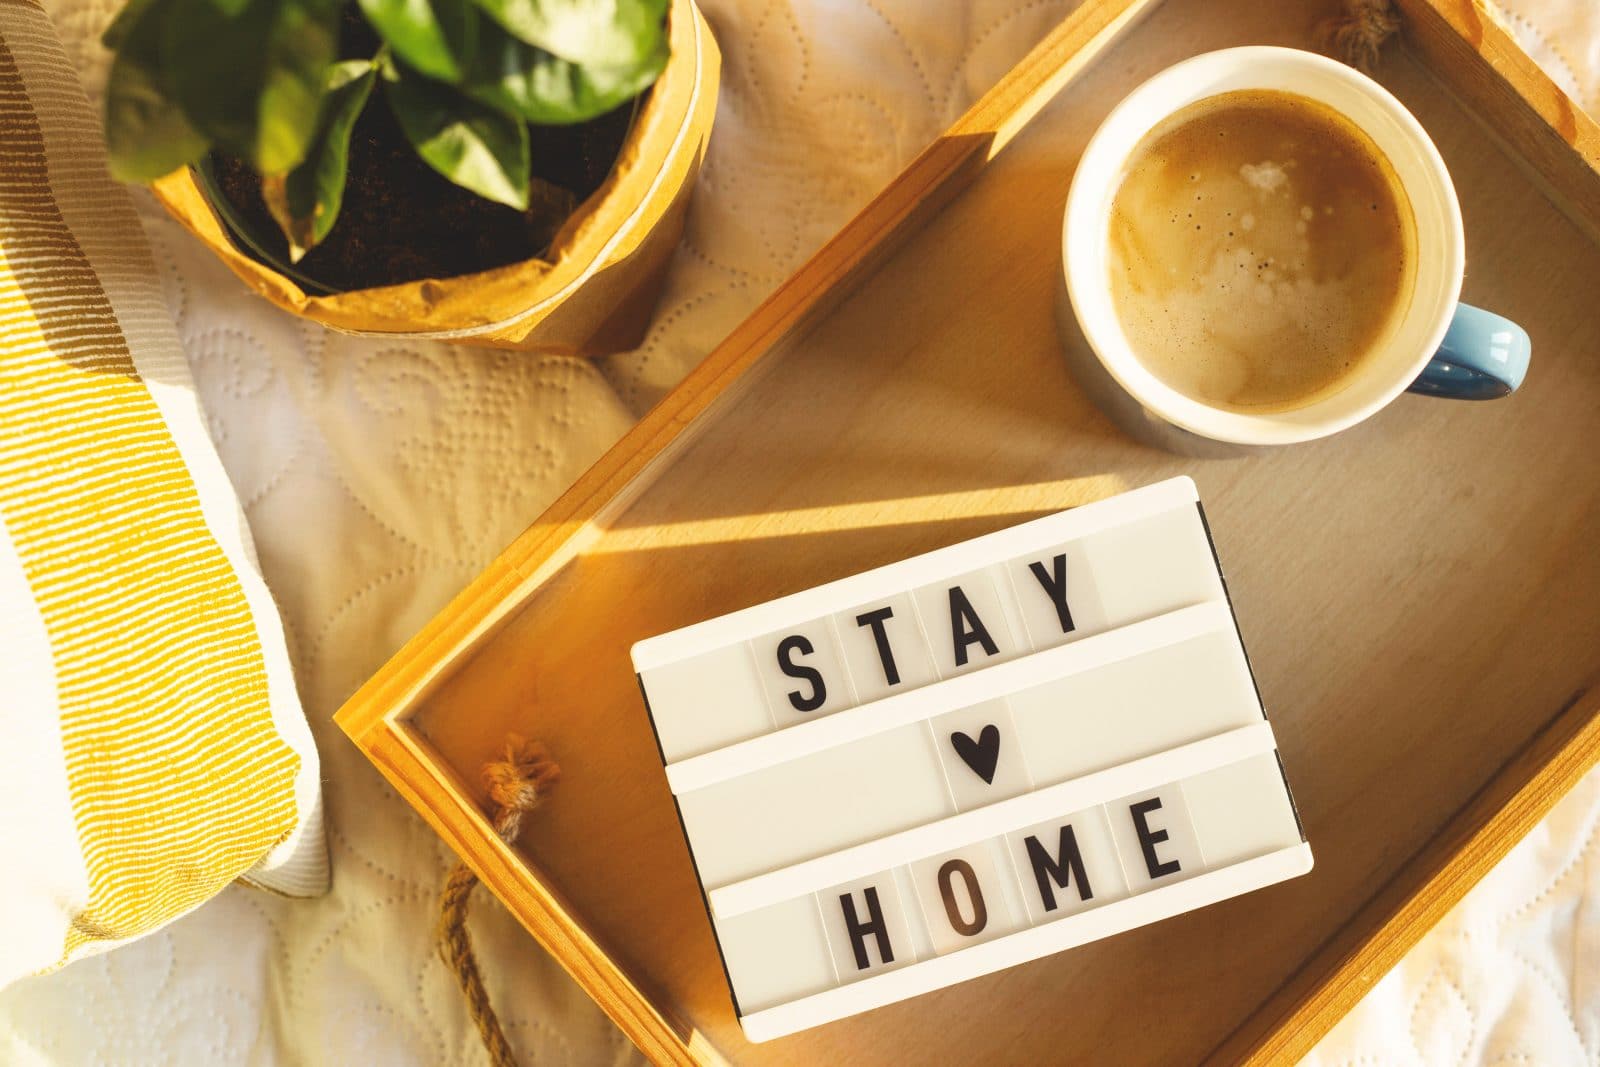 7 Things To Do That Will Make Staying At Home Fun